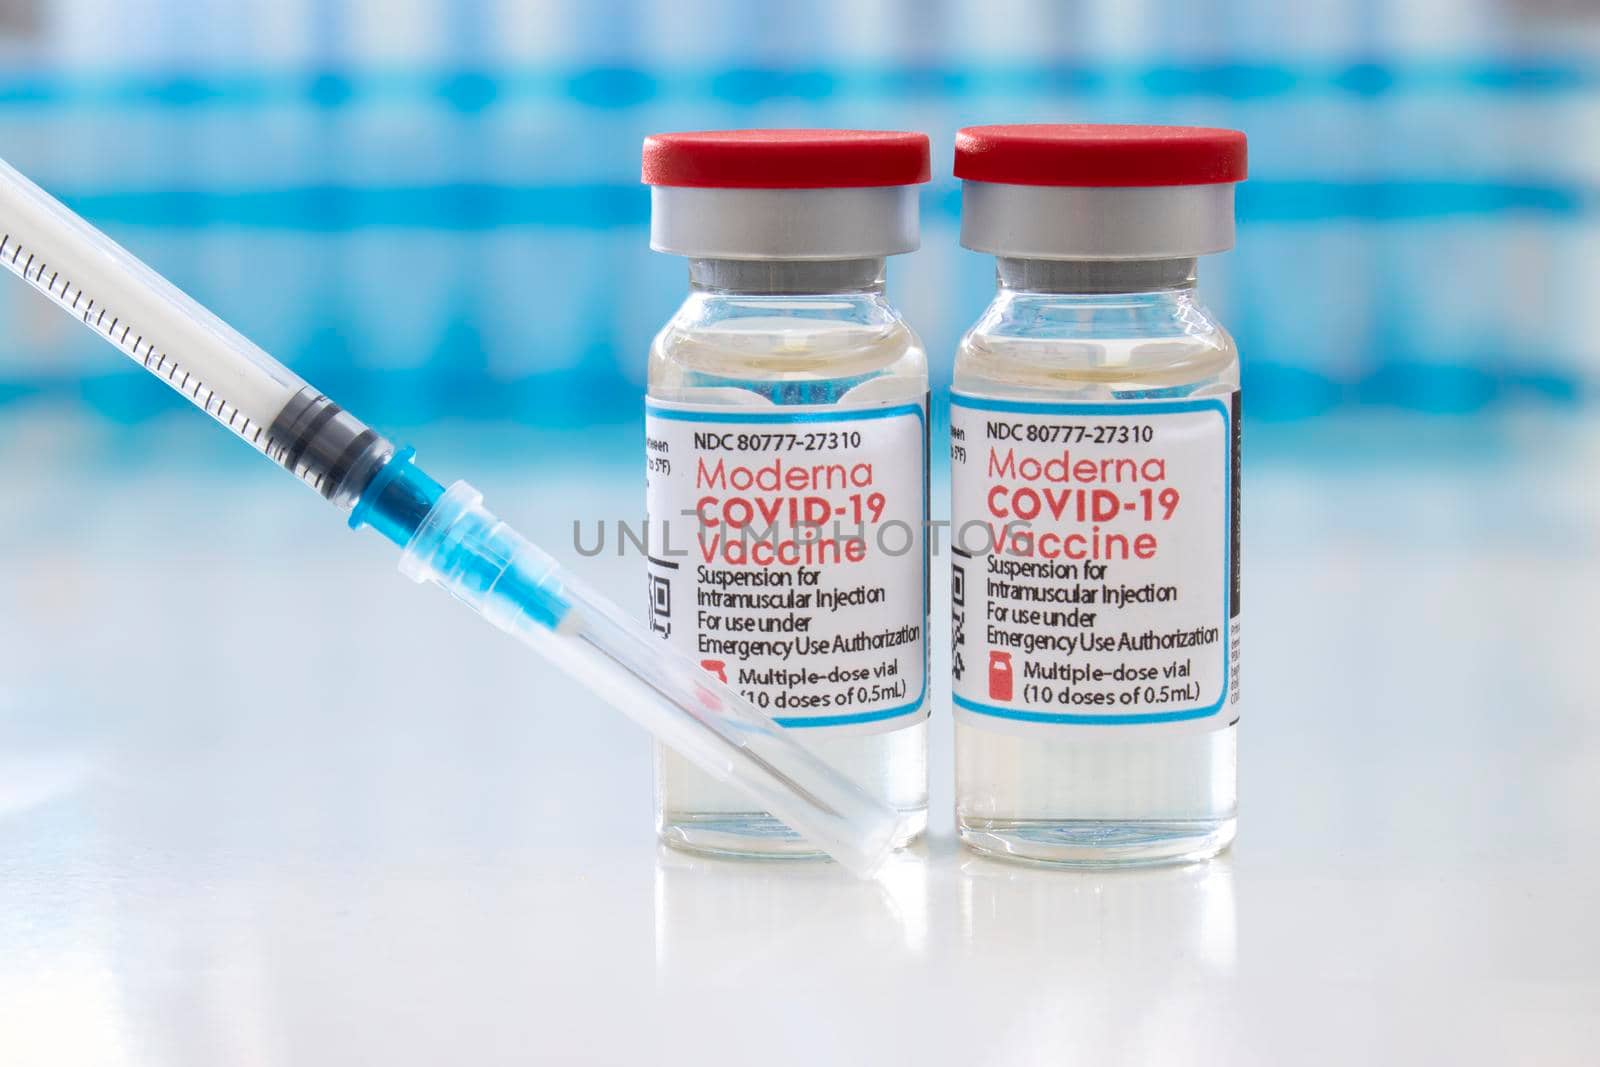 Calgary, Alberta, Canada. April 7, 2021. A couple of Moderna dosis of Covid-19 vaccines on vial bottles and an injection syringe. by oasisamuel